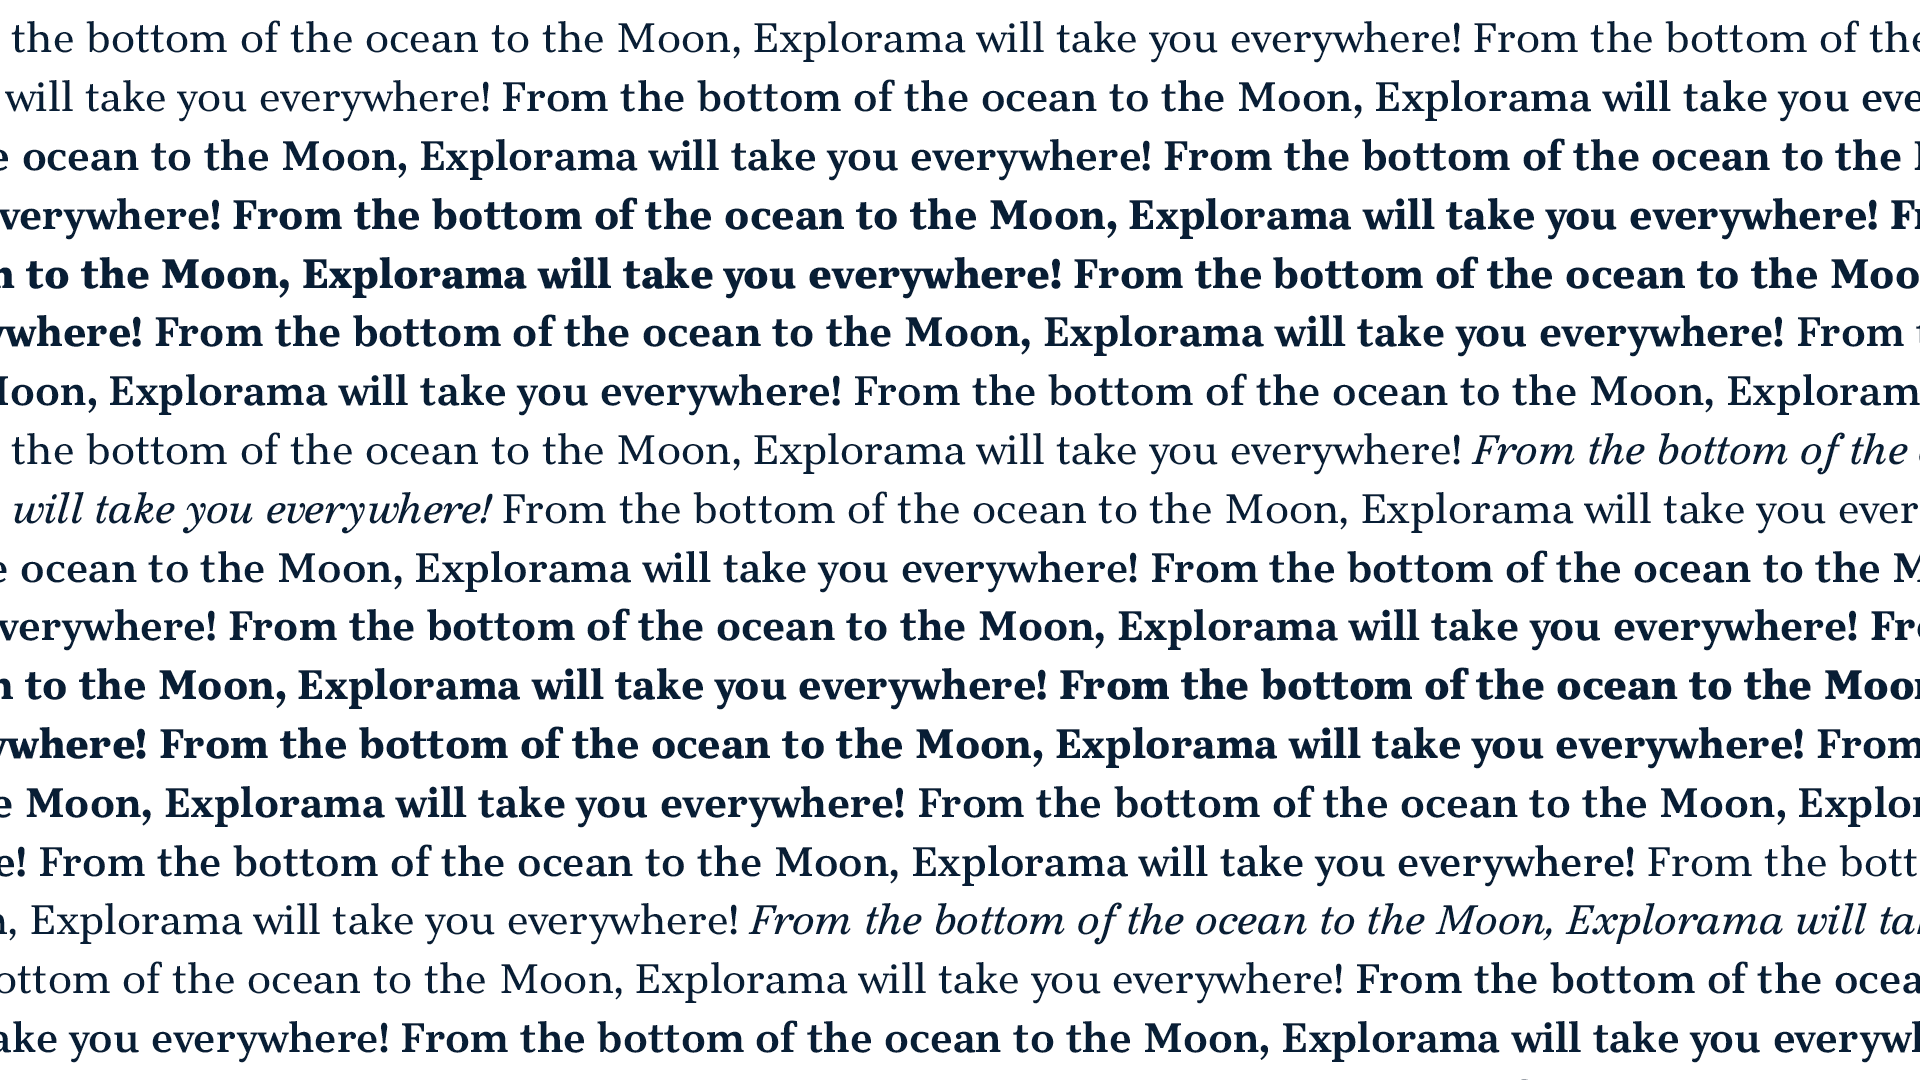 From the bottom of the ocean to the Moon, Explorama will take you everywhere!" written with the typeface Explorama in different weights.